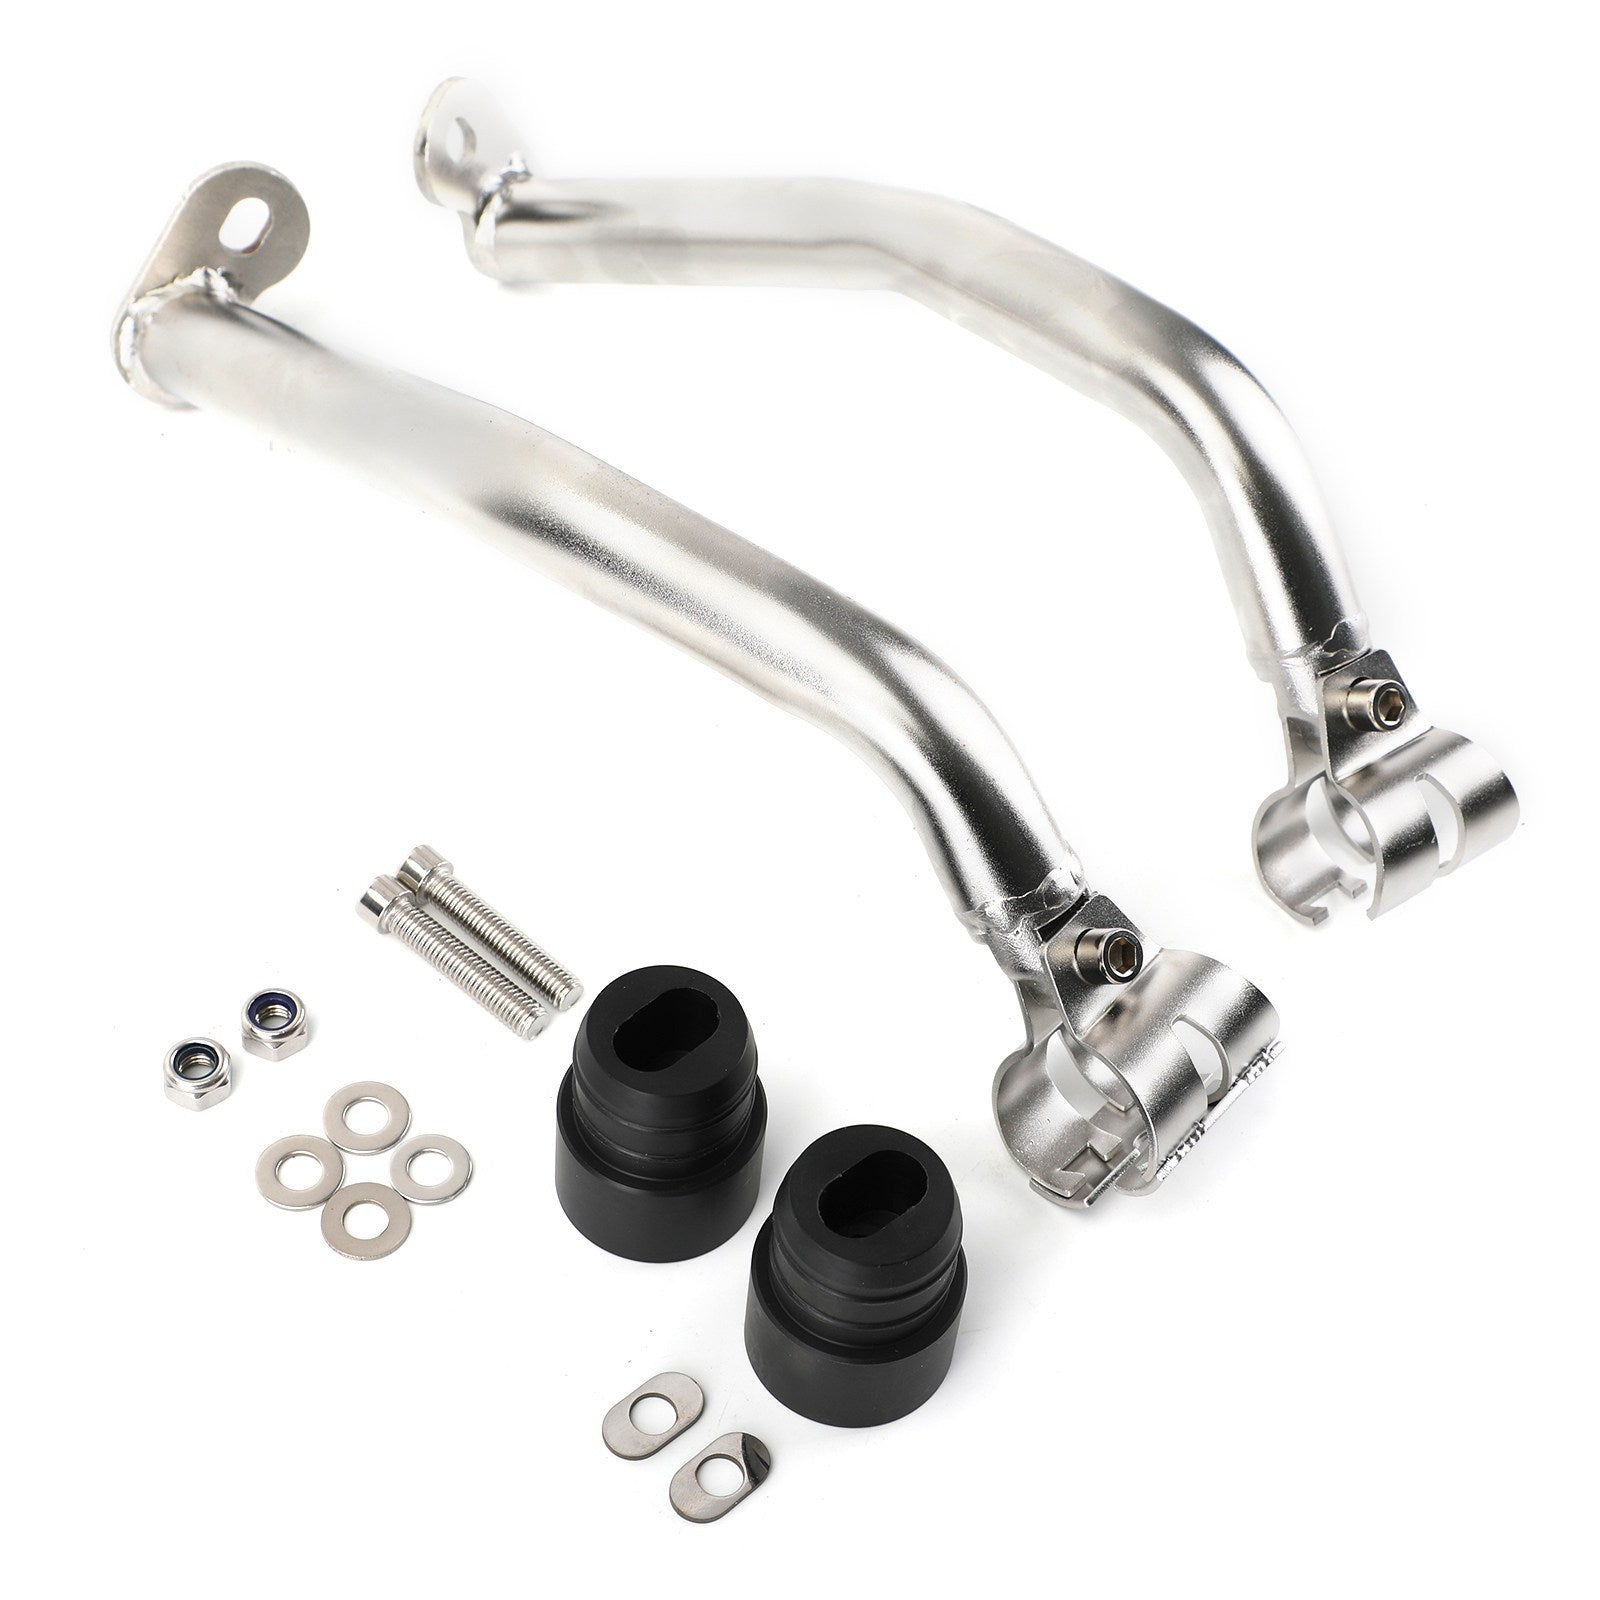 Cylinder Crash Bars Protection Fit for BMW R 1250 GS Adventure 2018 - 2021 Generic